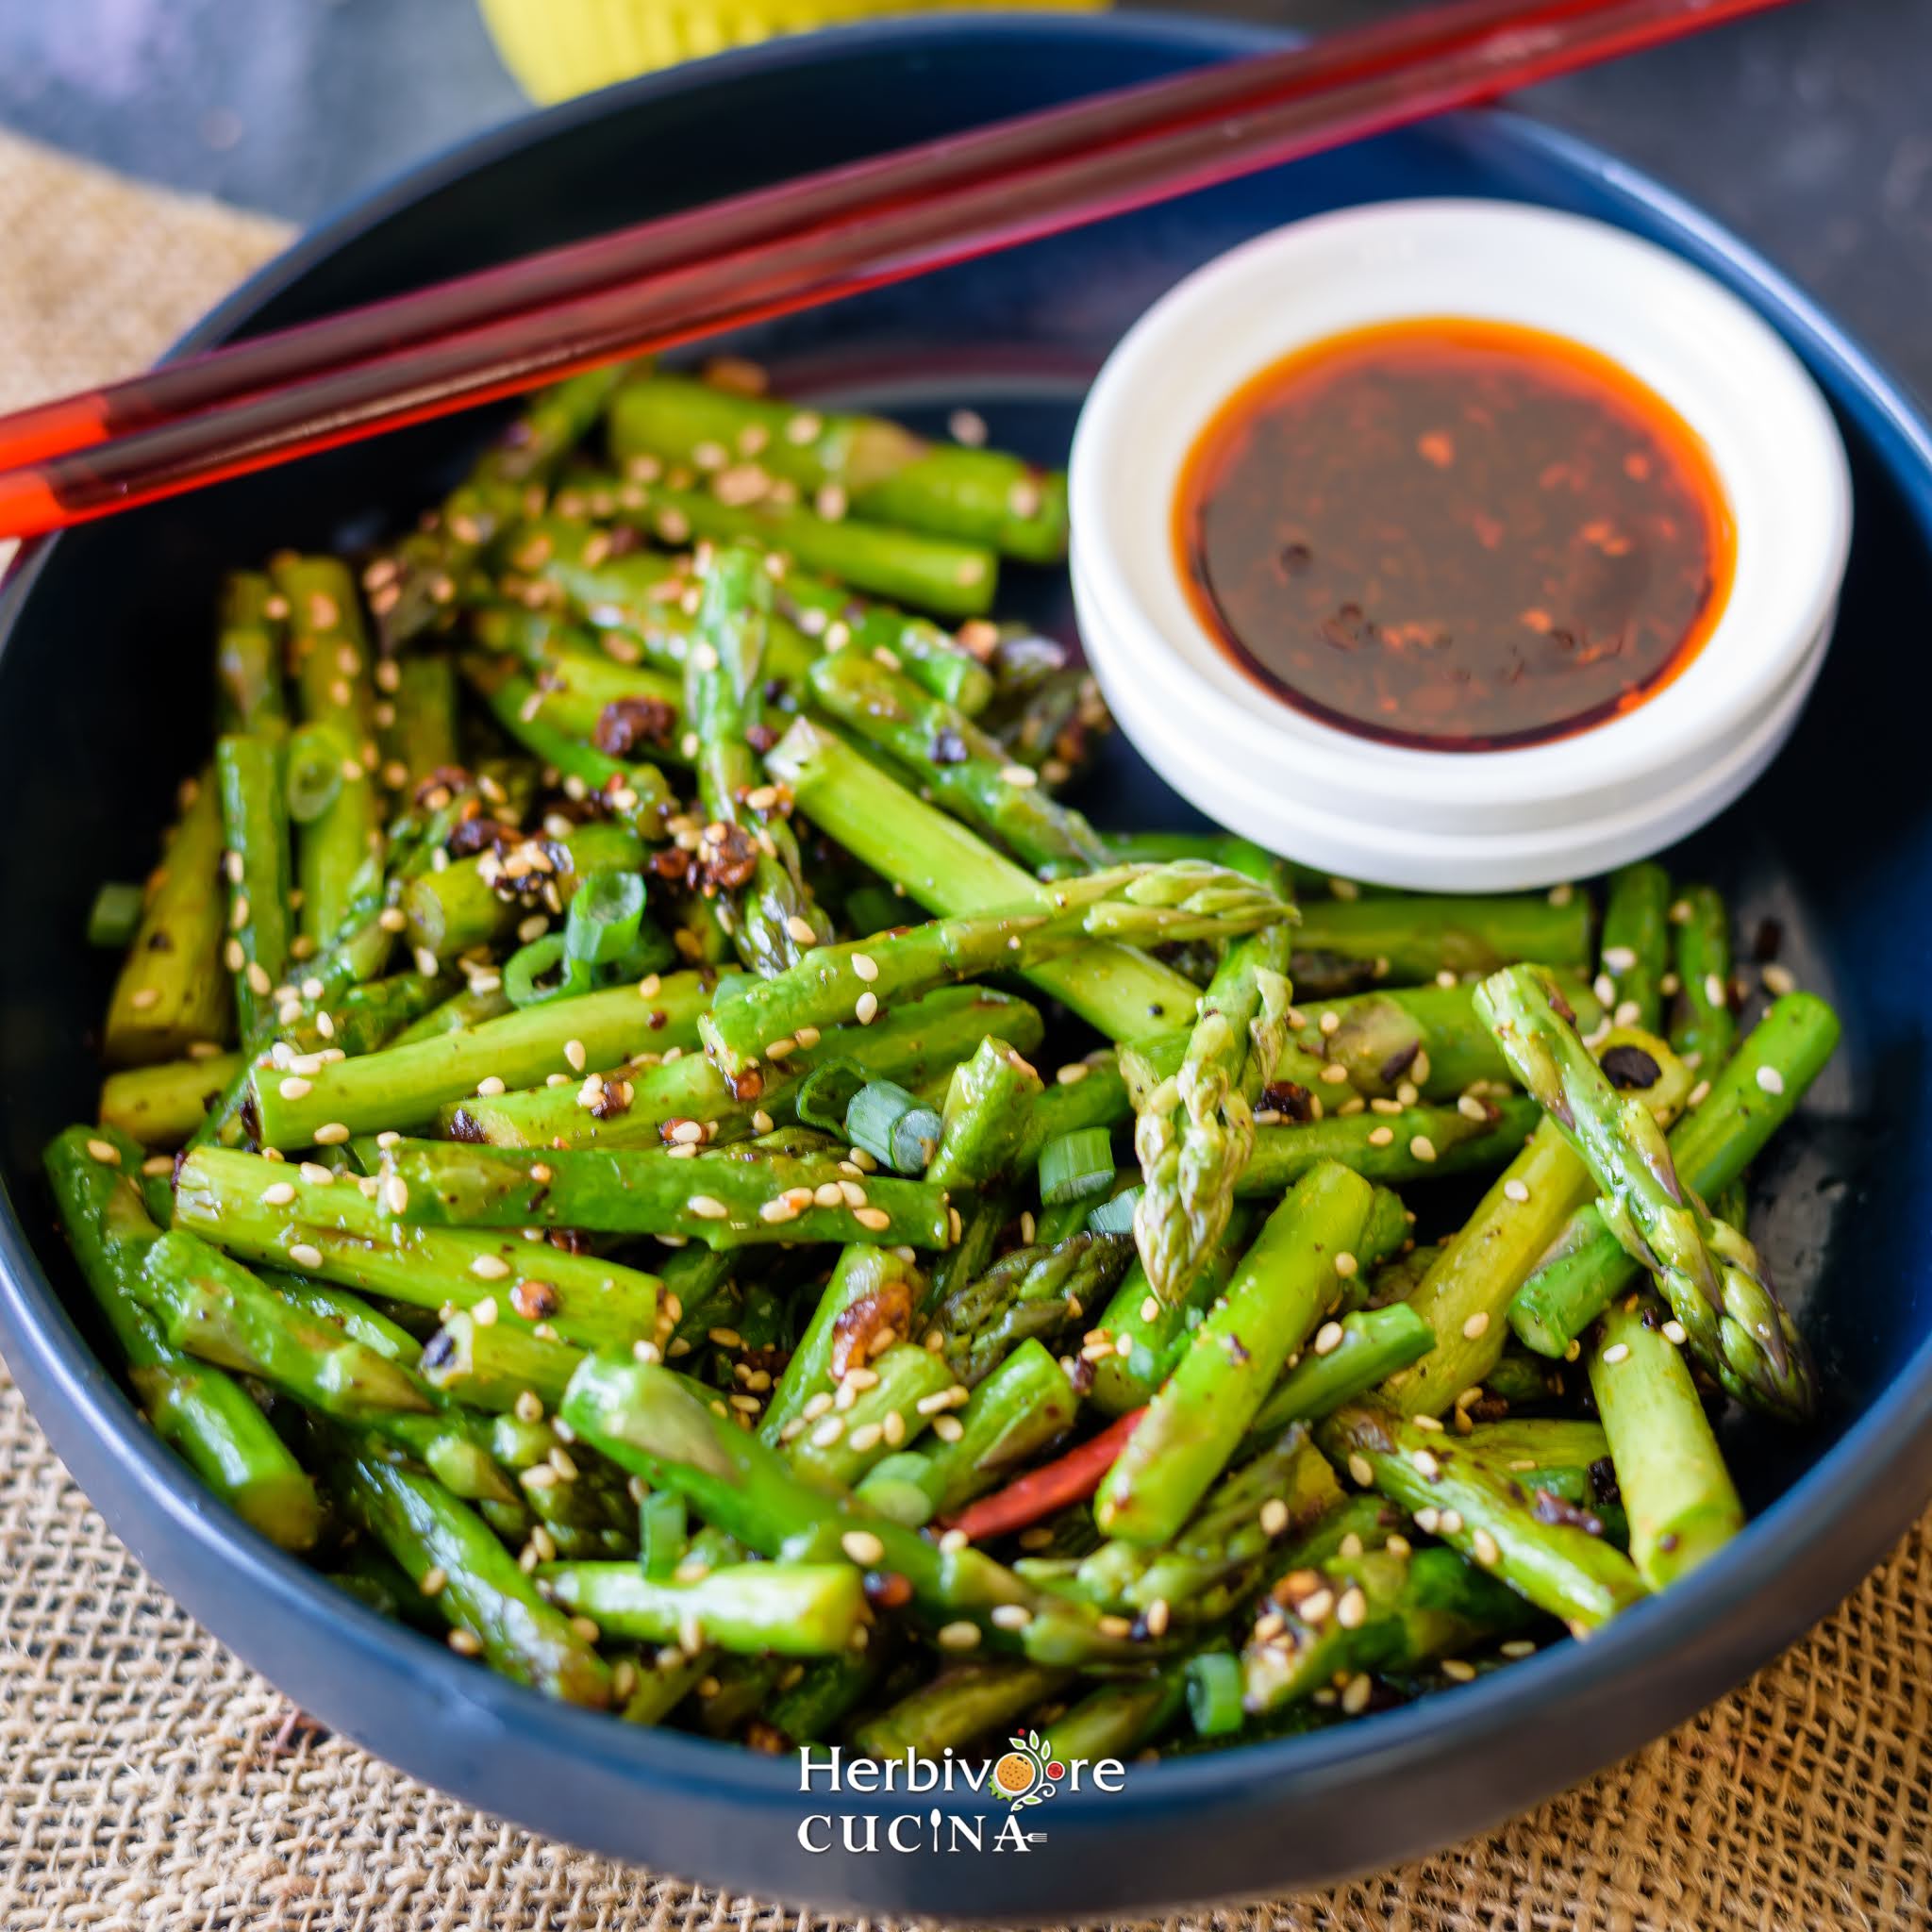 Stir Fried Asparagus in a blue bowl with chili oil placed in a small bowl beside it.